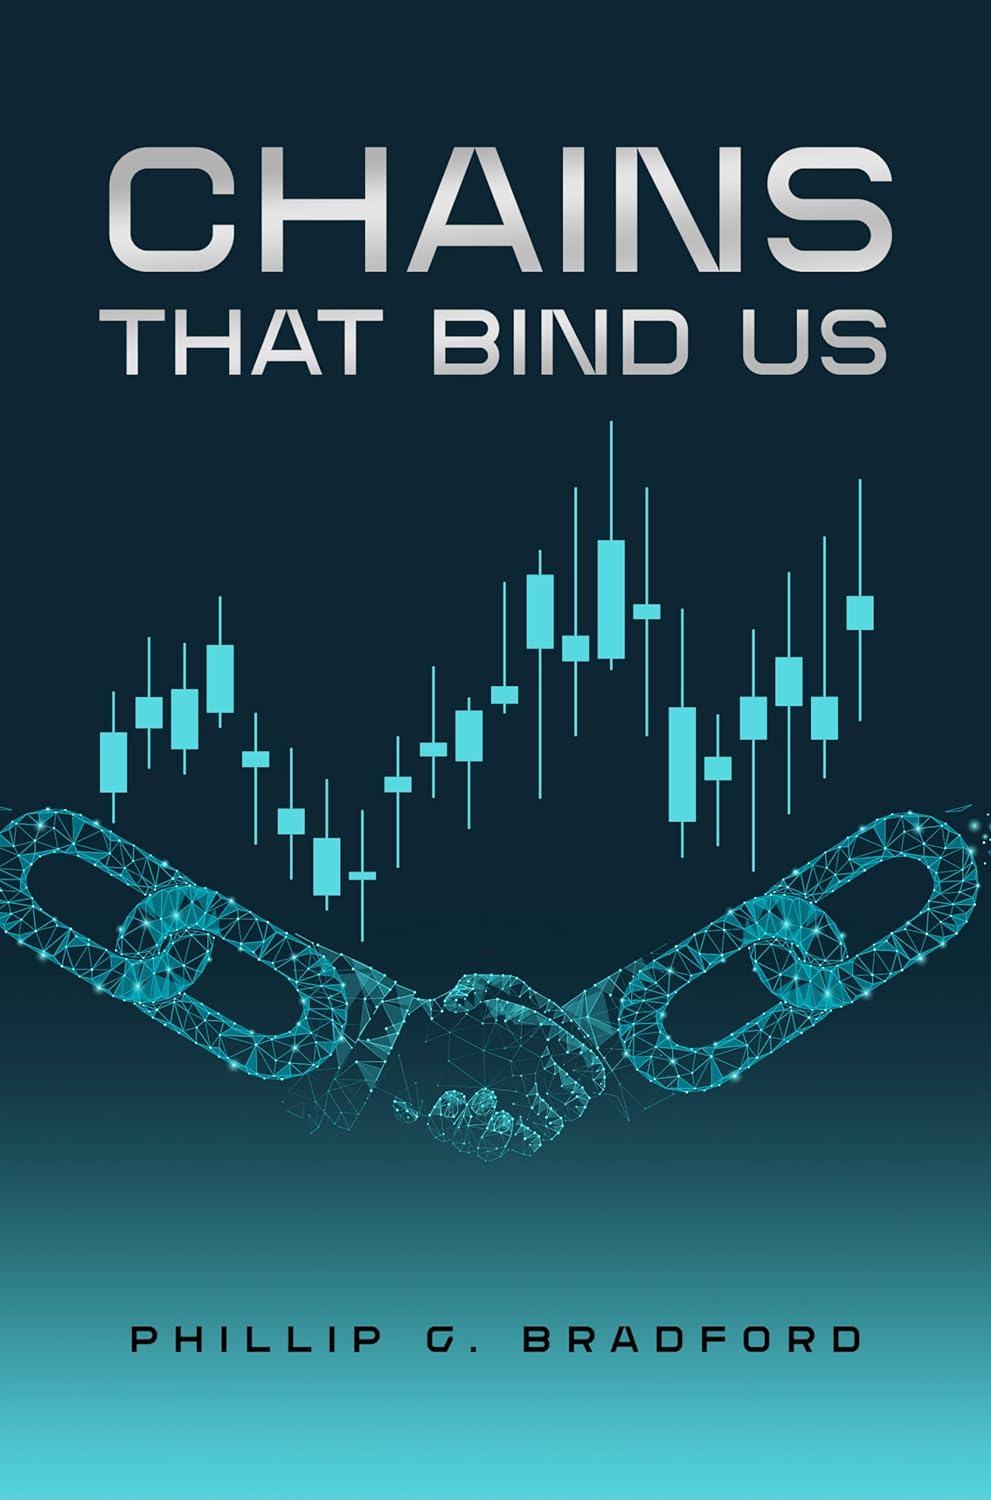 Understand The World Of Blockchain With This New Book By Phillip G. Bradford